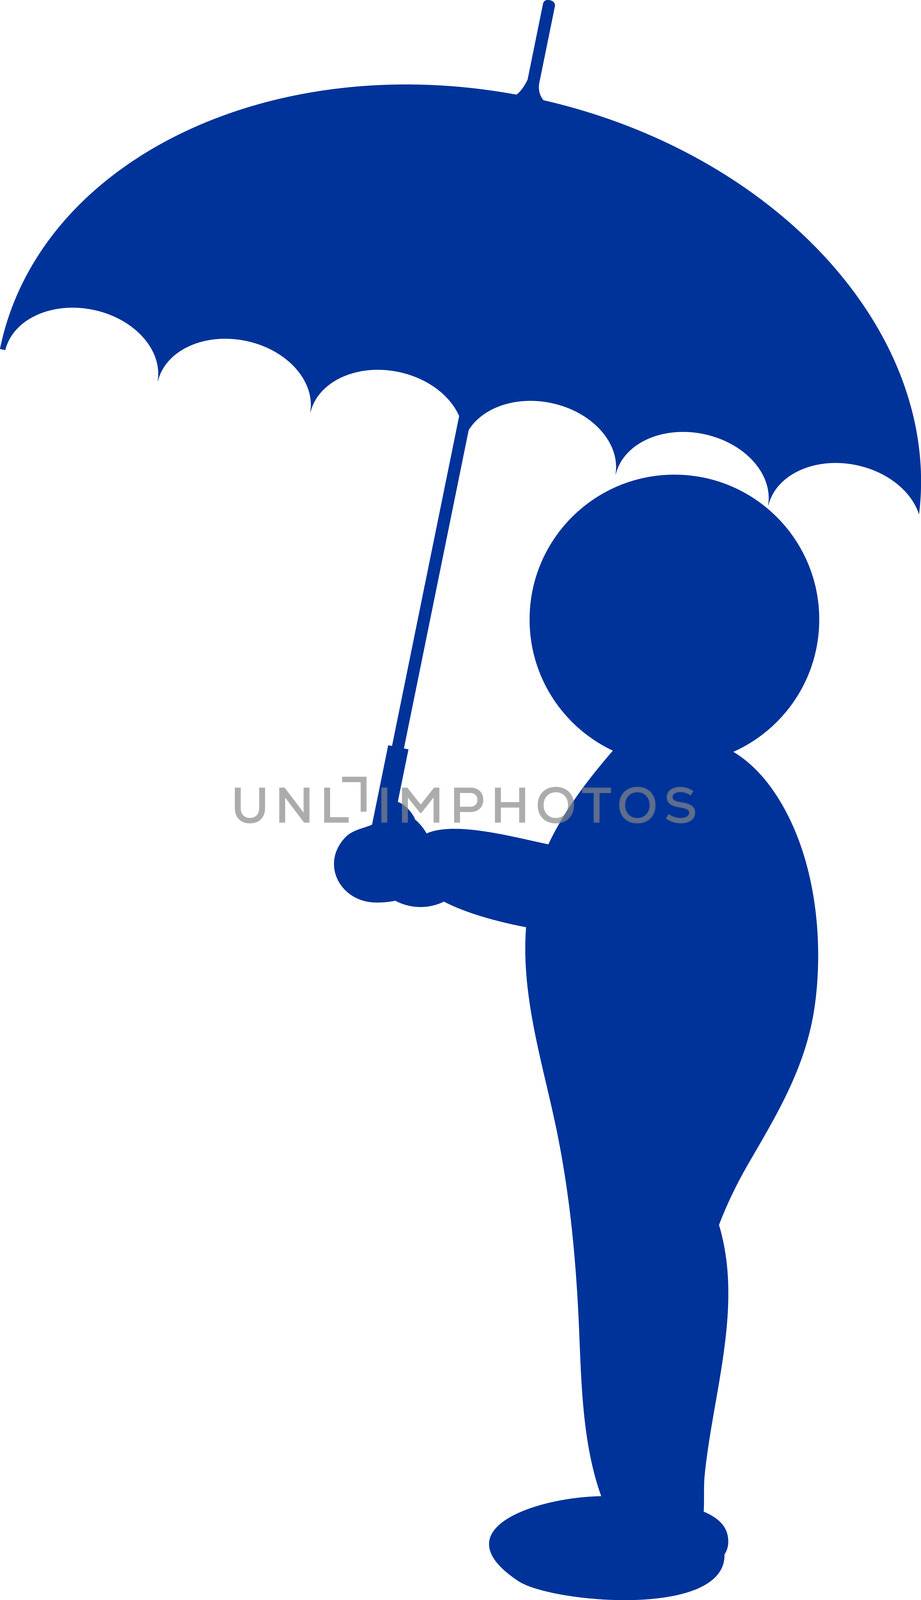 a illustration of a silhouette with umbrella